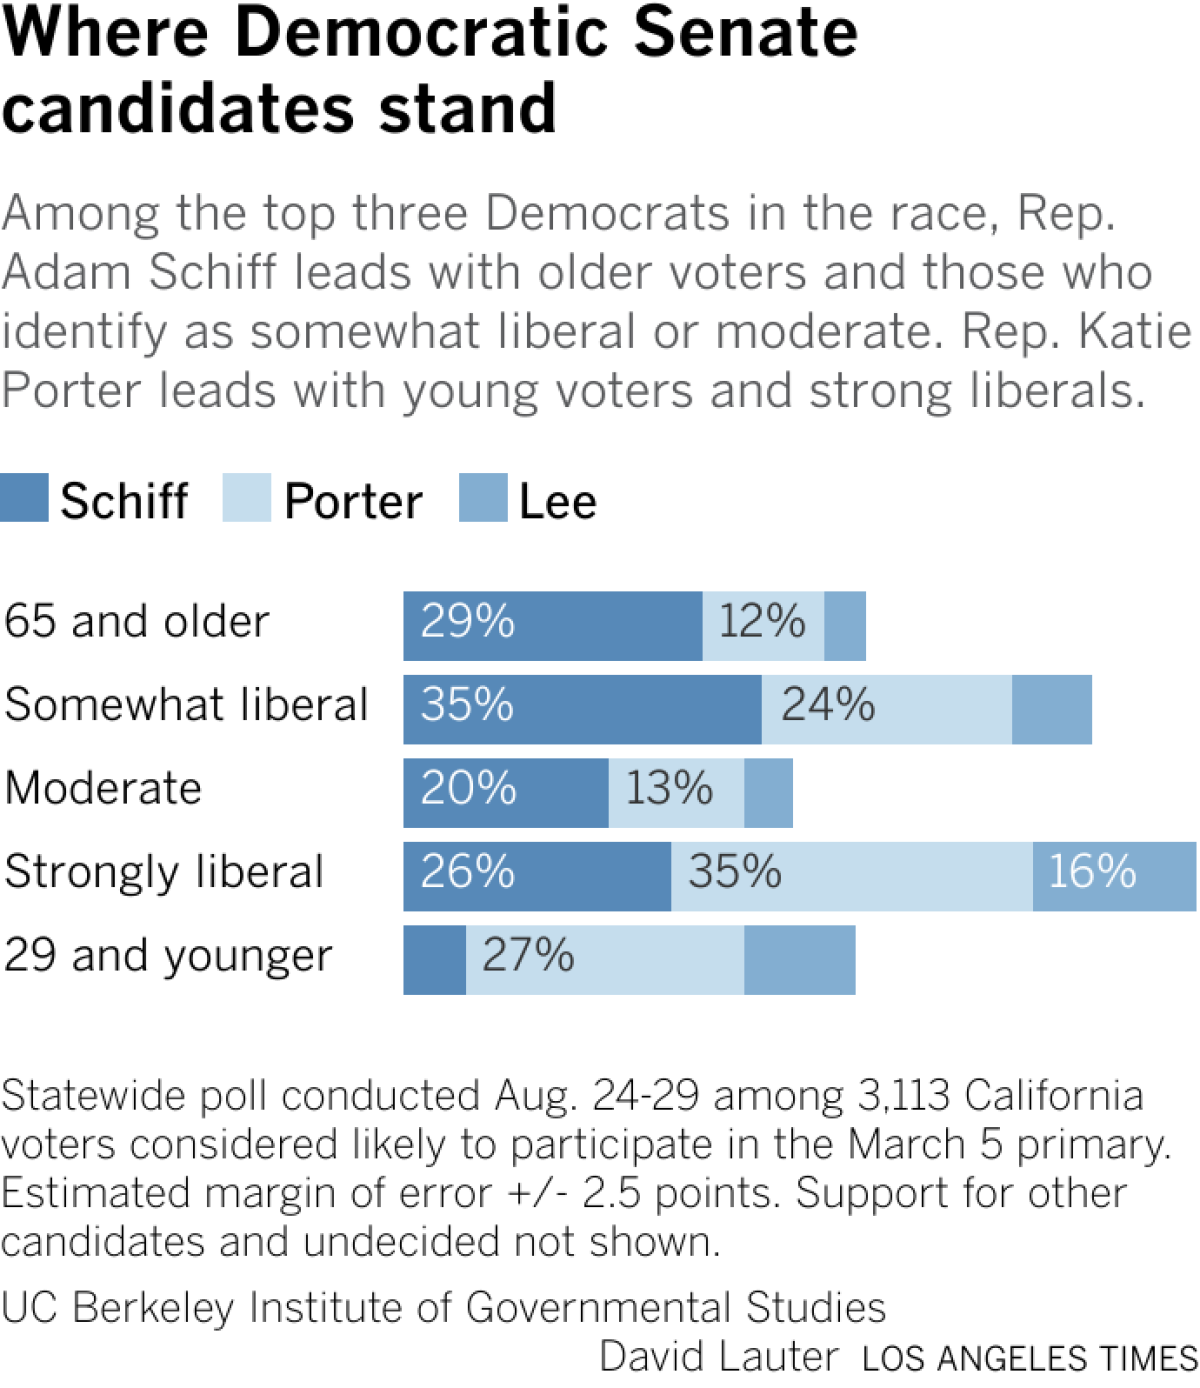 Among the top three Democrats in the race, Rep. Adam Schiff leads with older voters and those who identify as somewhat liberal or moderate. Rep. Katie Porter leads with young voters and strong liberals.